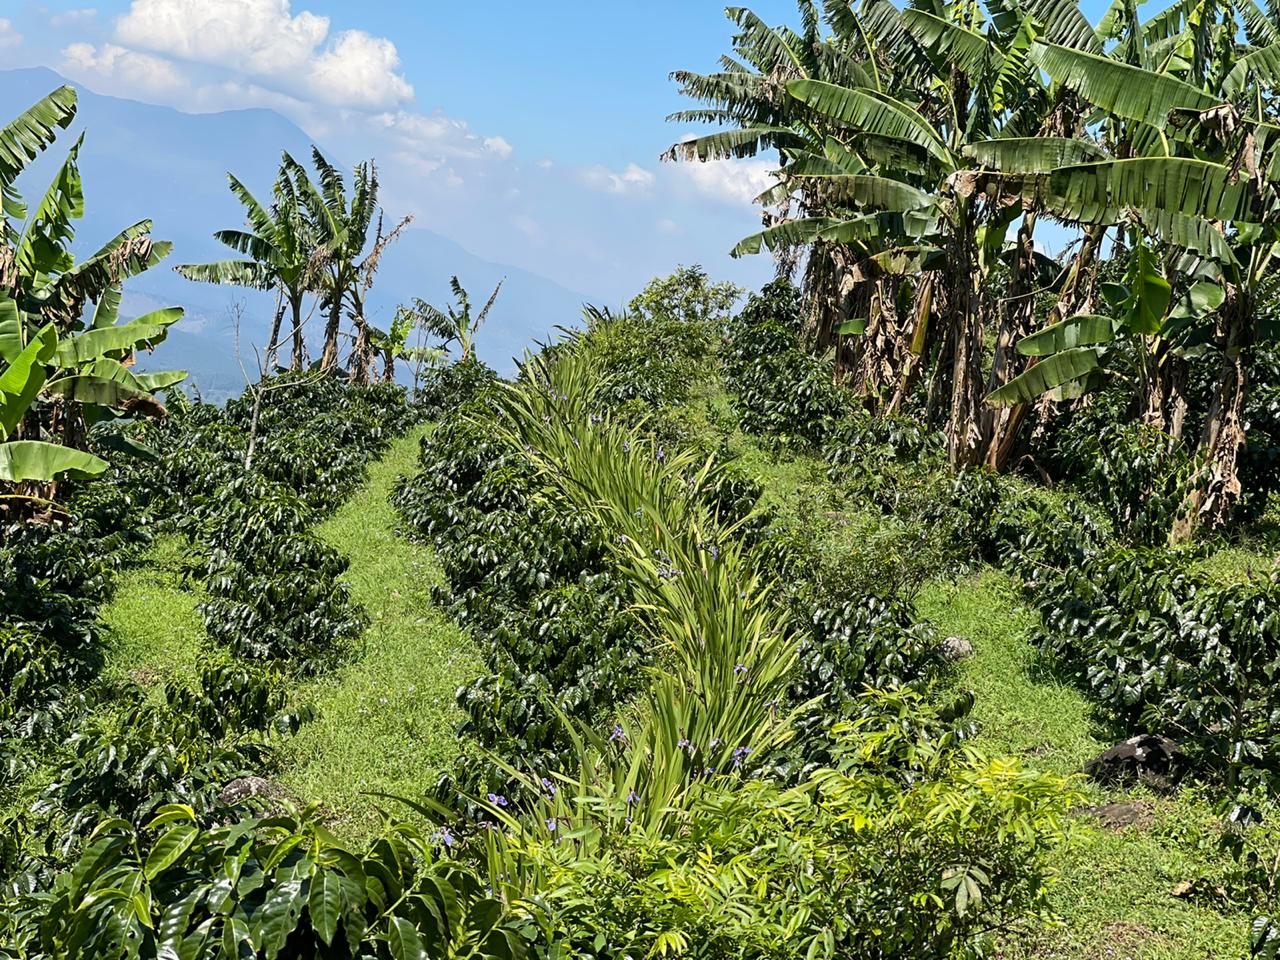 Overhead view of coffee plants intercropped with banana and other crops